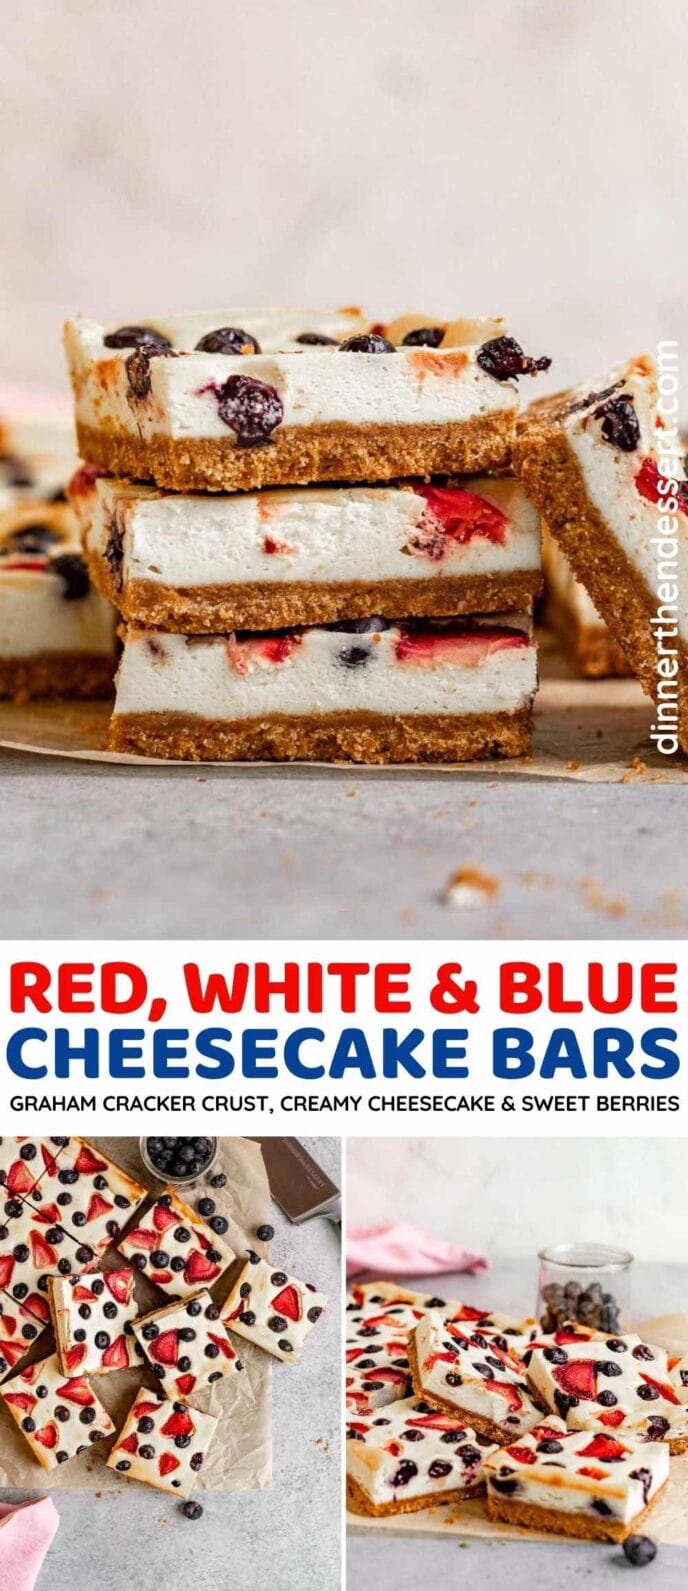 Red, white and blue cheesecake bars collage